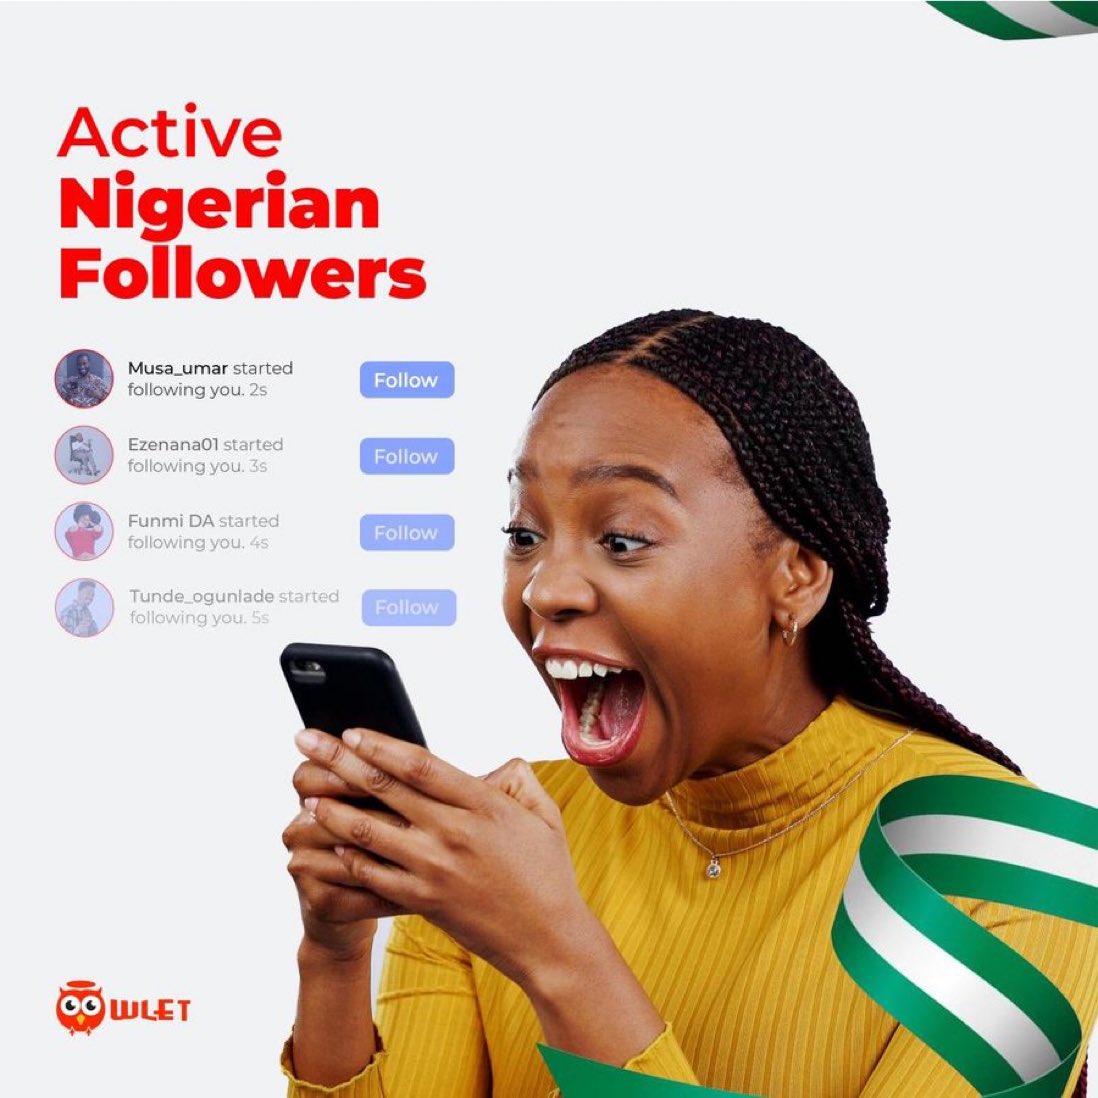 Nobody Dey deliver reach #OwletOnline when it comes to social media services. You can get active and real engagements, followers, views and comments at the best rate. Visit theowletonline.com to get started.